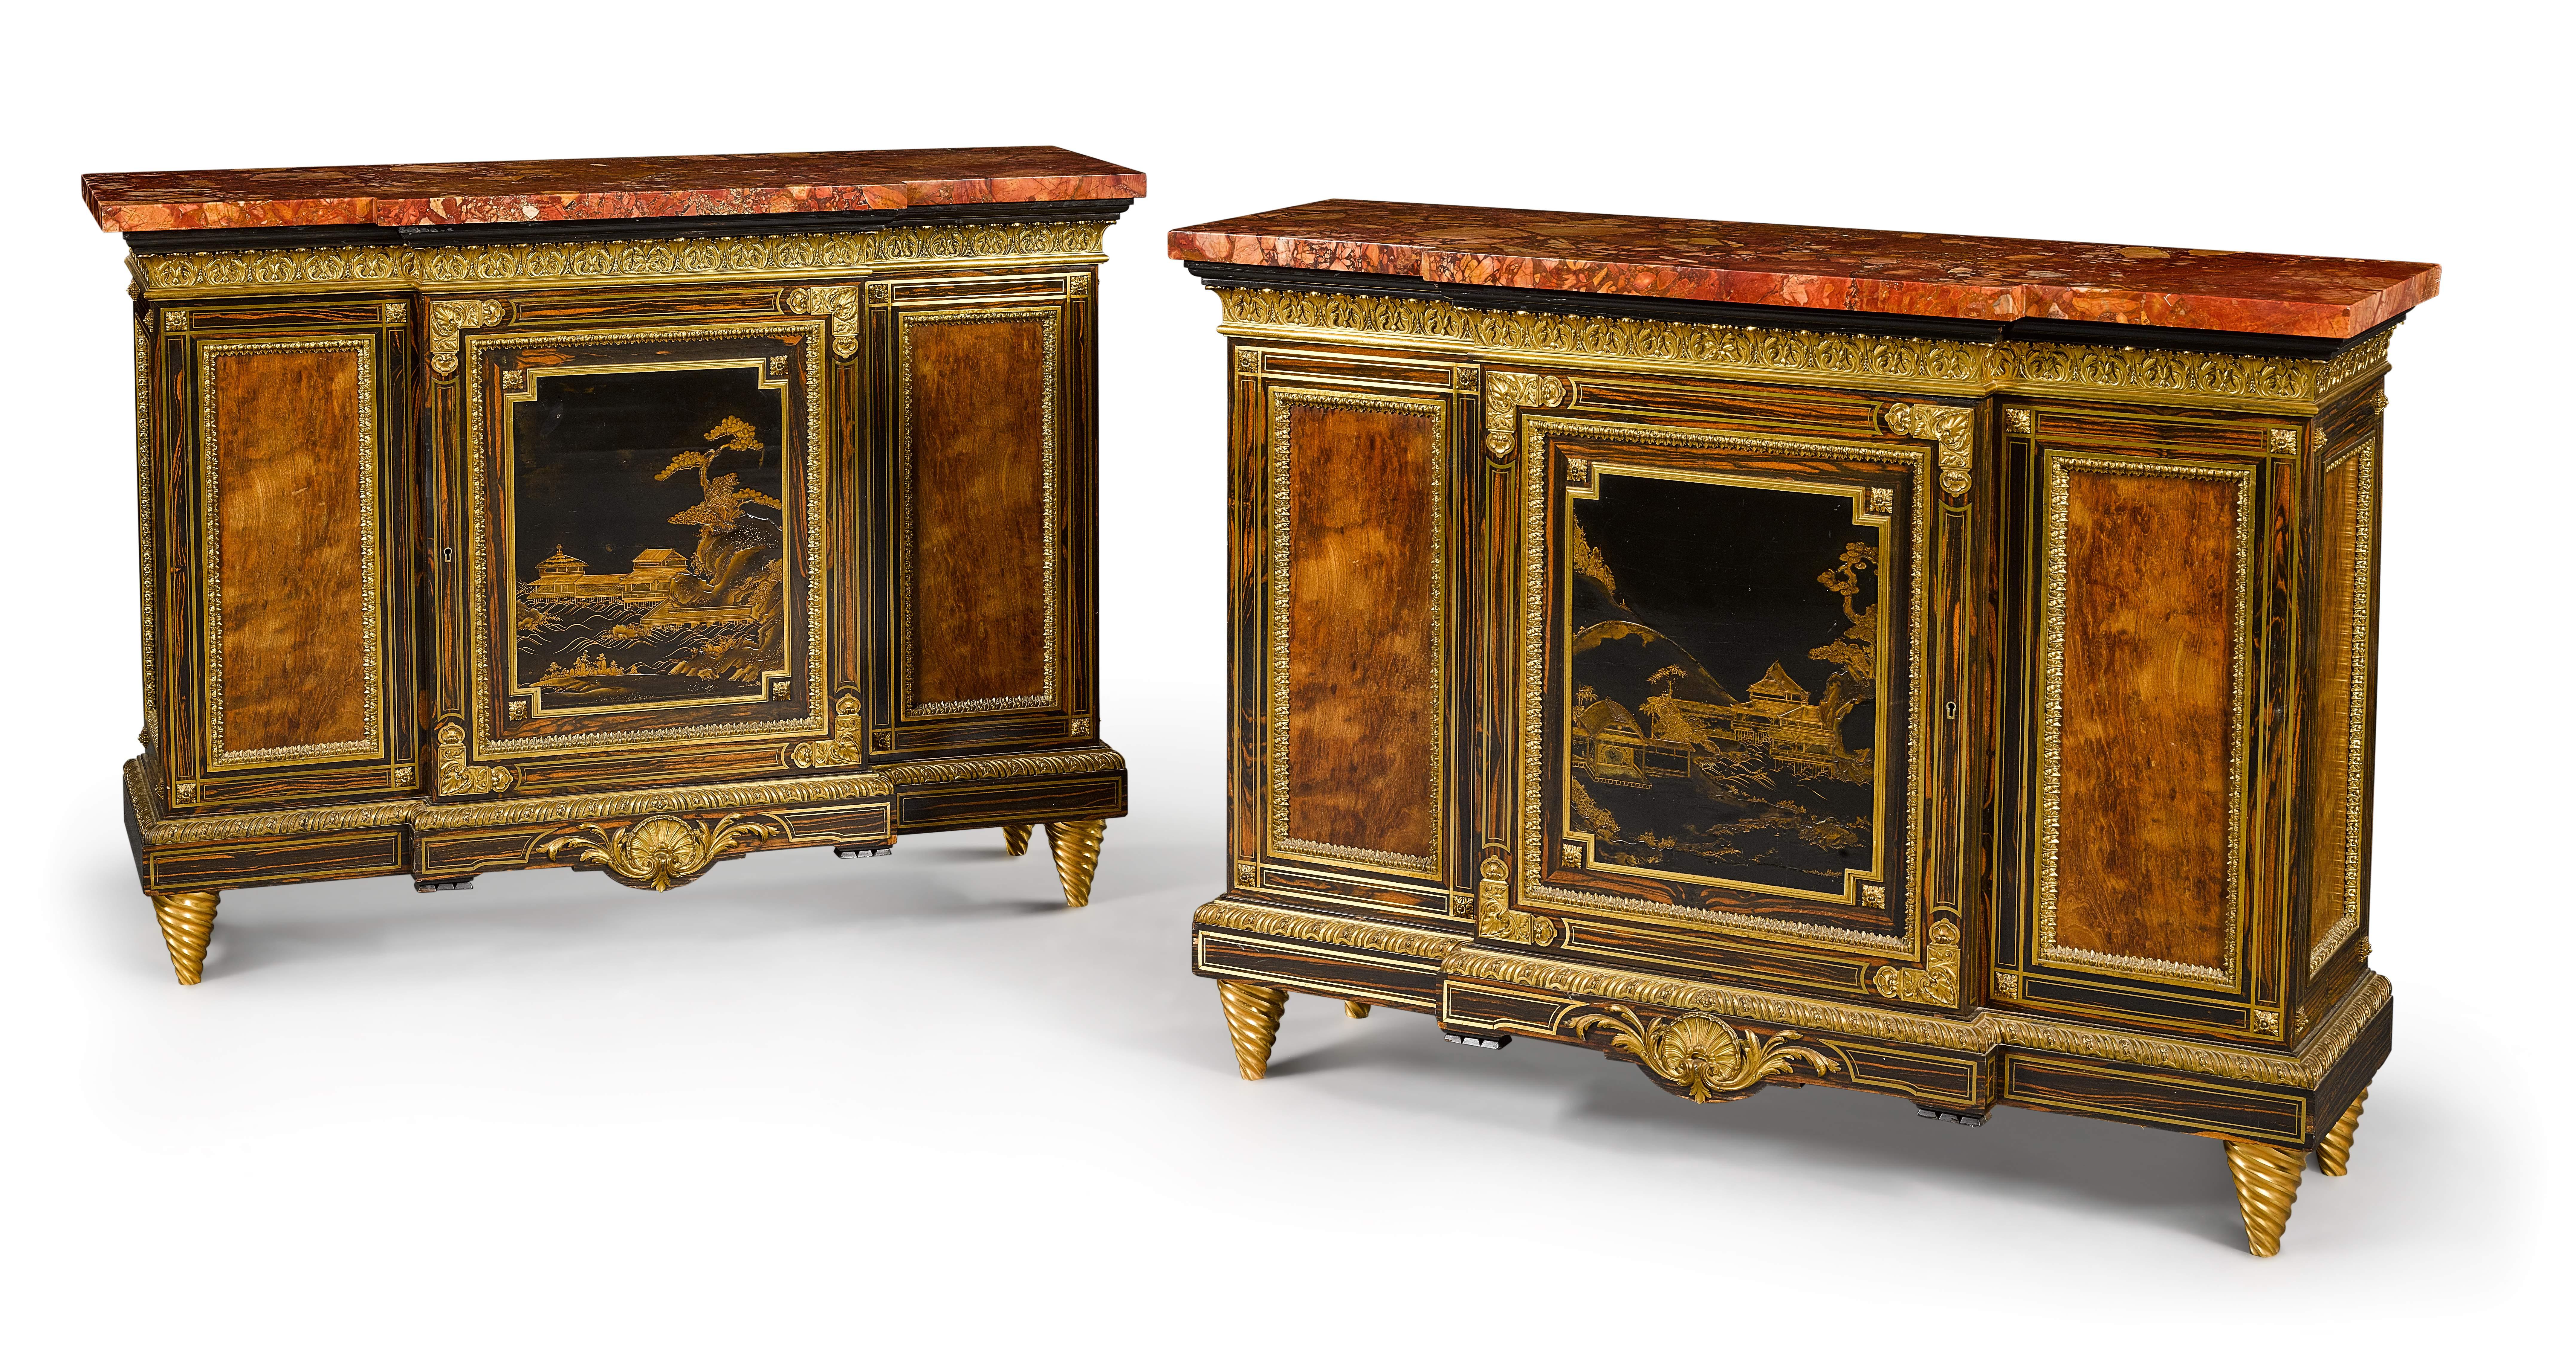 A pair of Louis XIV style gilt-bronze mounted calamander breakfront side cabinets, the Algerian brèche sanguine marble tops above a cupboard door incorporating Japanese lacquer panels, Edo period 17th century, opening to reveal a single adjustable